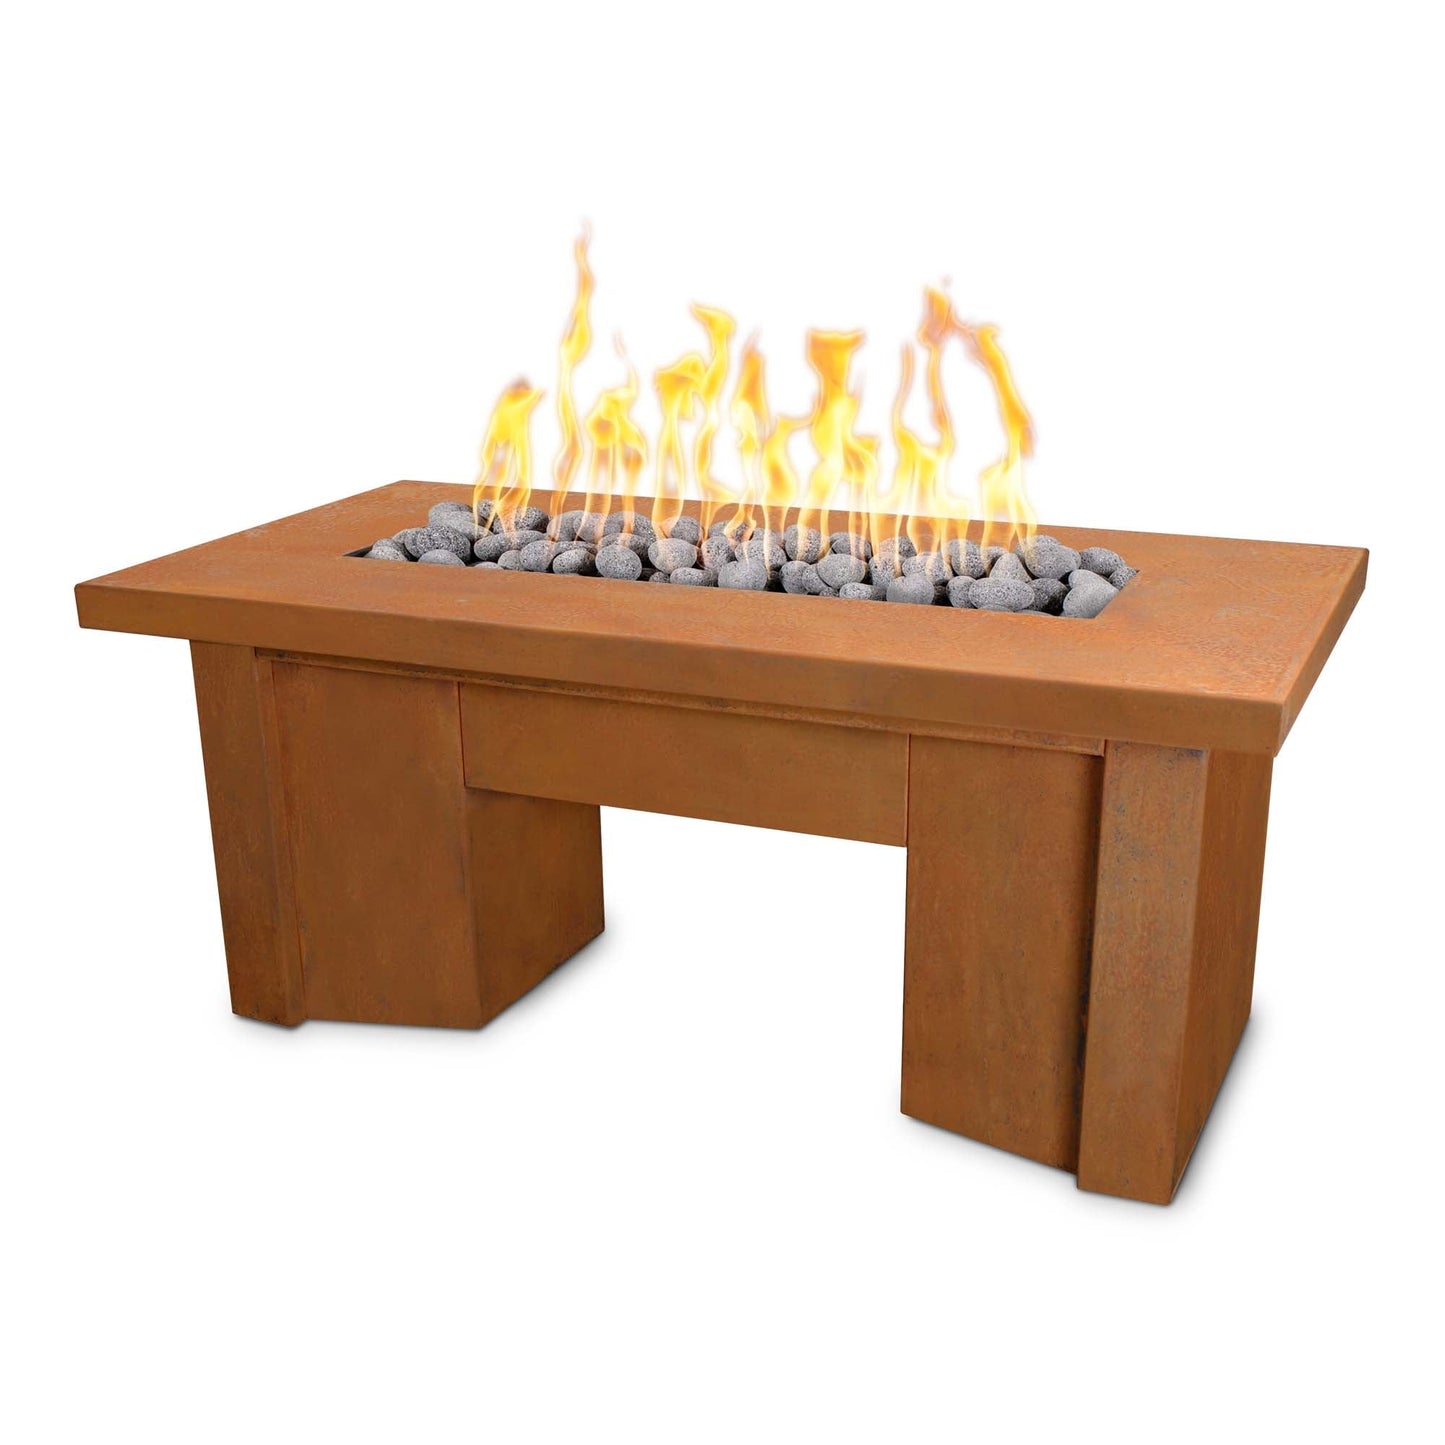 The Outdoor Plus Rectangular Alameda 60" Corten Steel Liquid Propane Fire Pit with Match Lit with Flame Sense Ignition